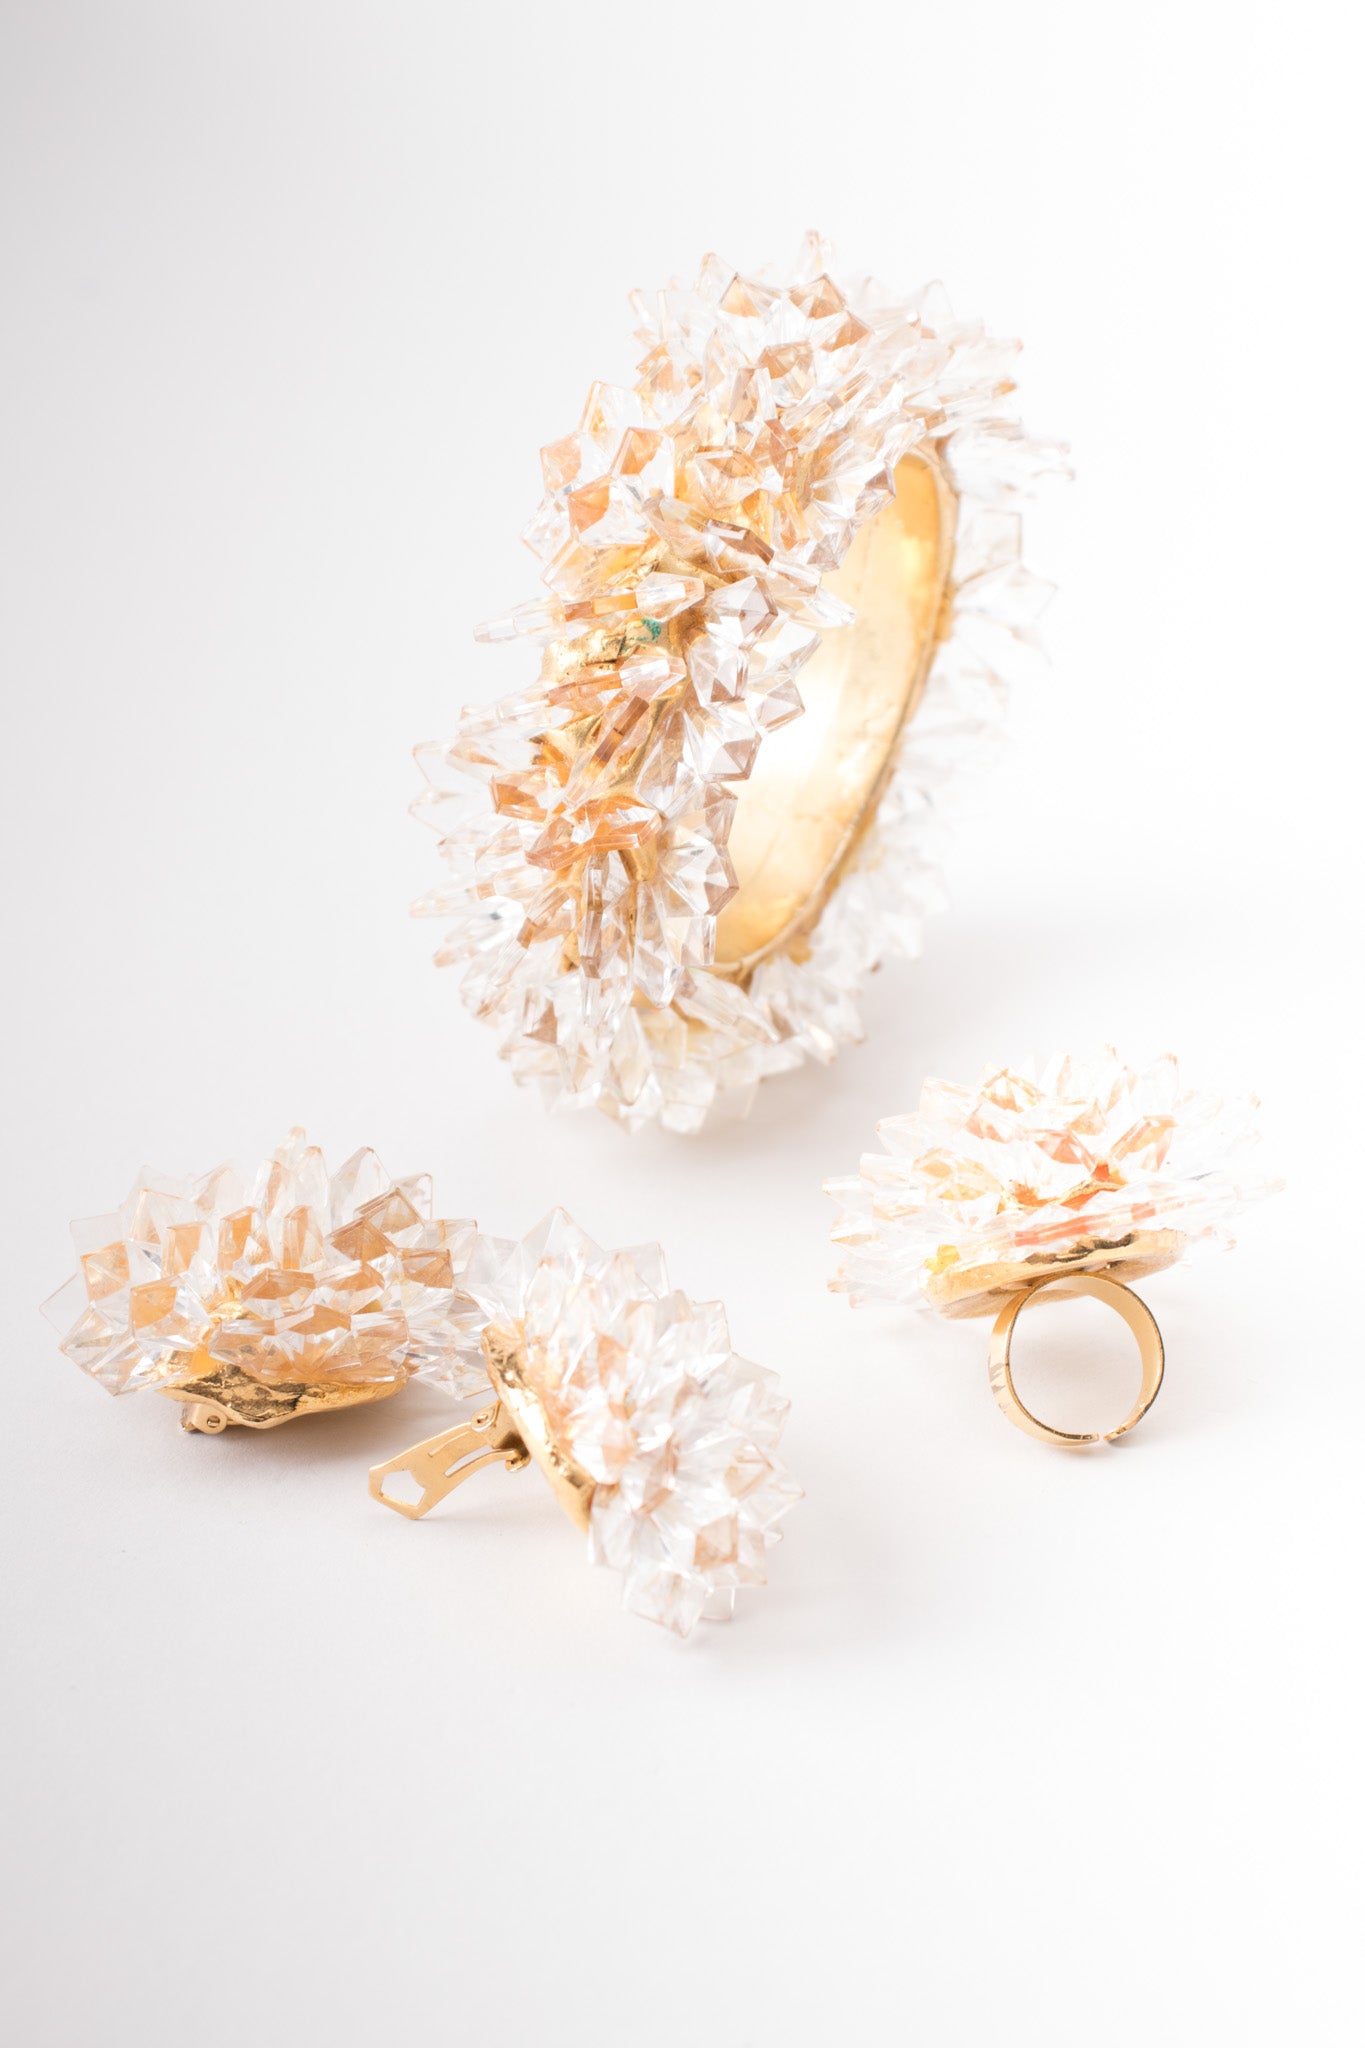 Alexis Lahellec Crystal Stalactite Flower Cocktail Ring